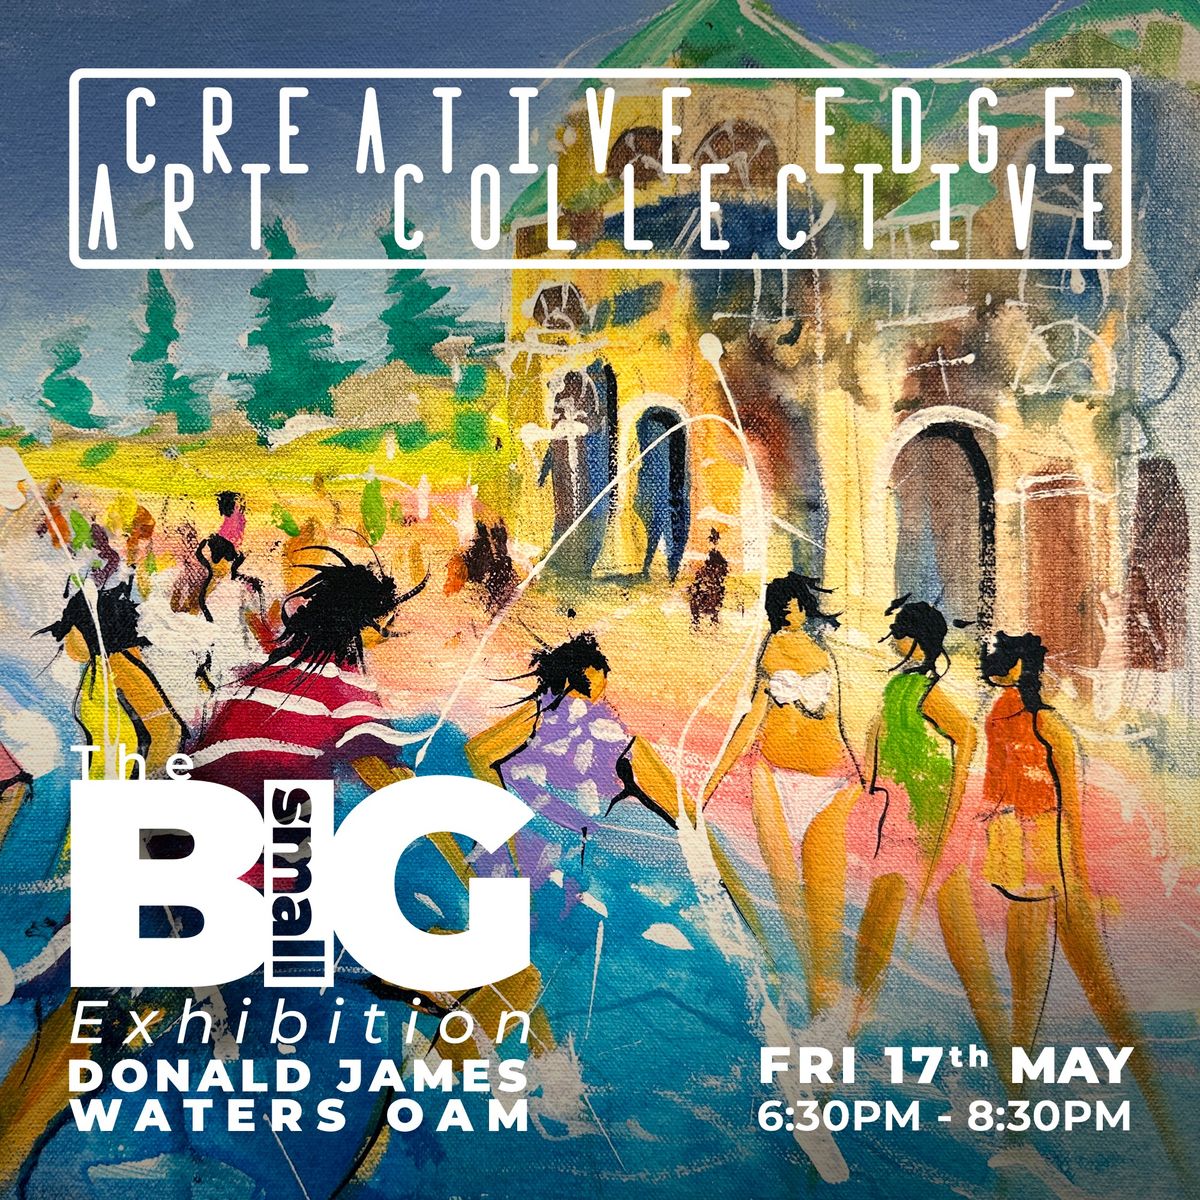 THE BIG small EXHIBITION with Donald James Waters OAM! Opening Night